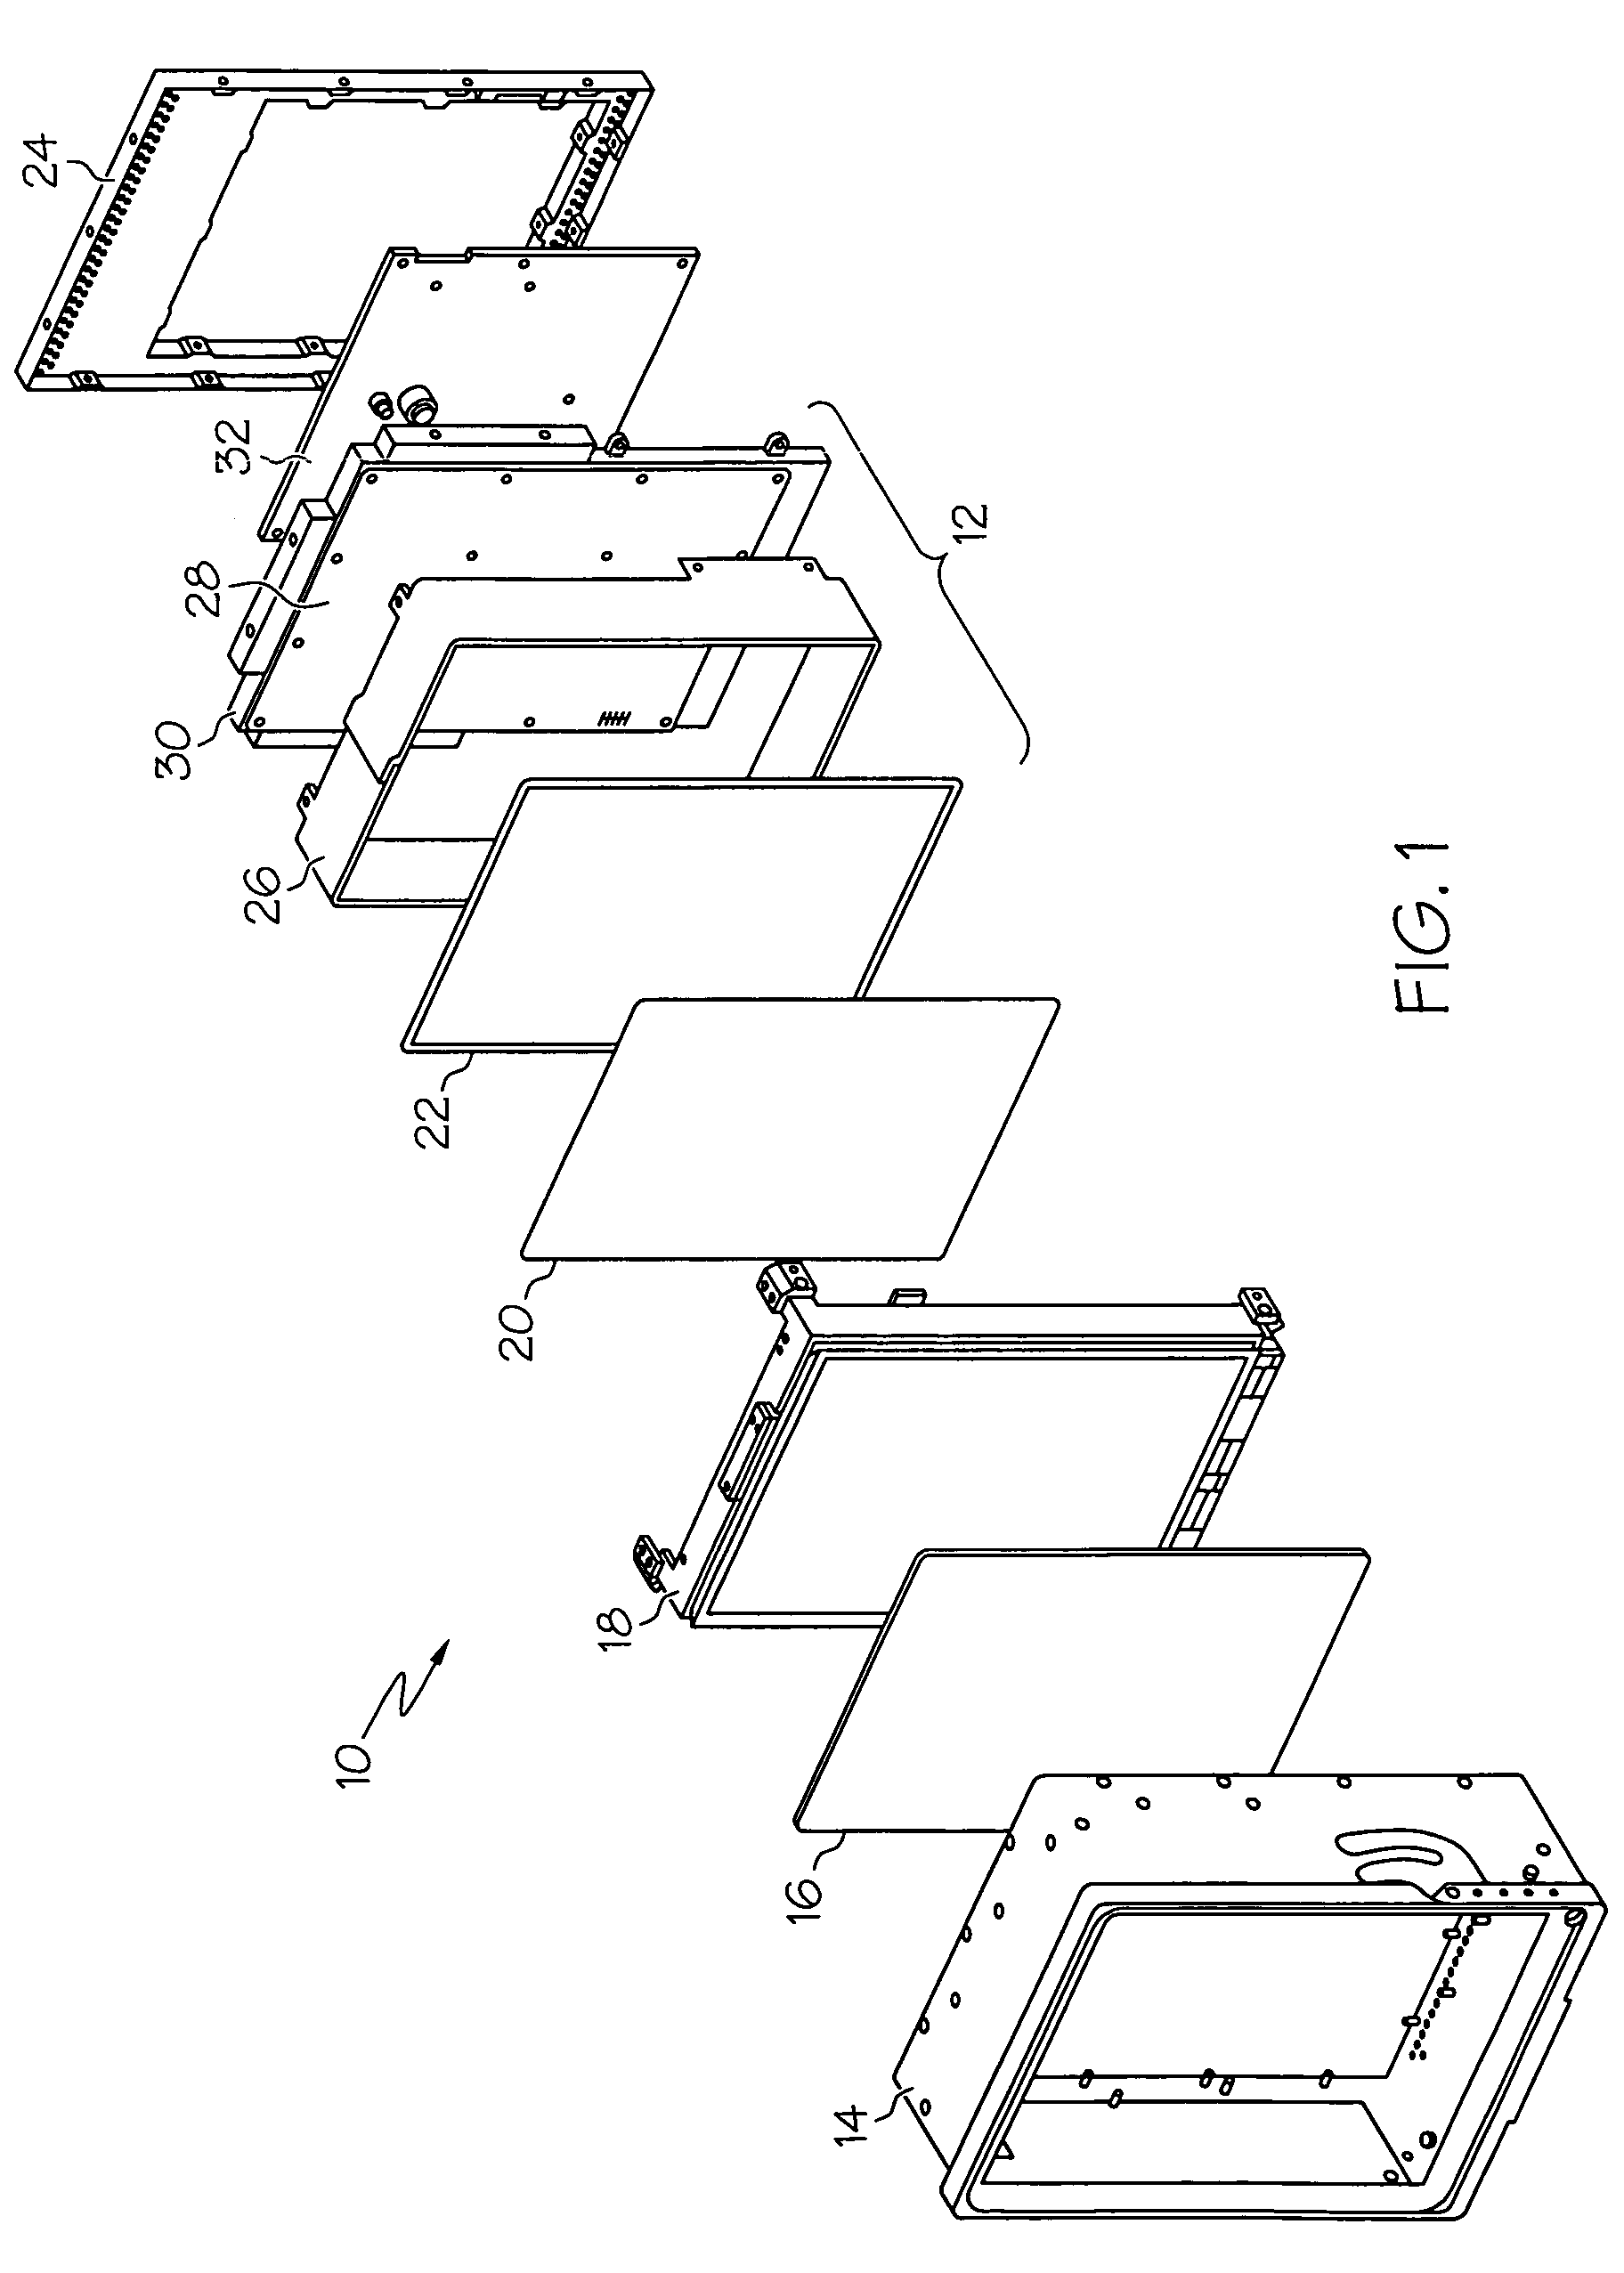 High efficiency backlight assembly for flat panel display assembly and method for the manufacture thereof